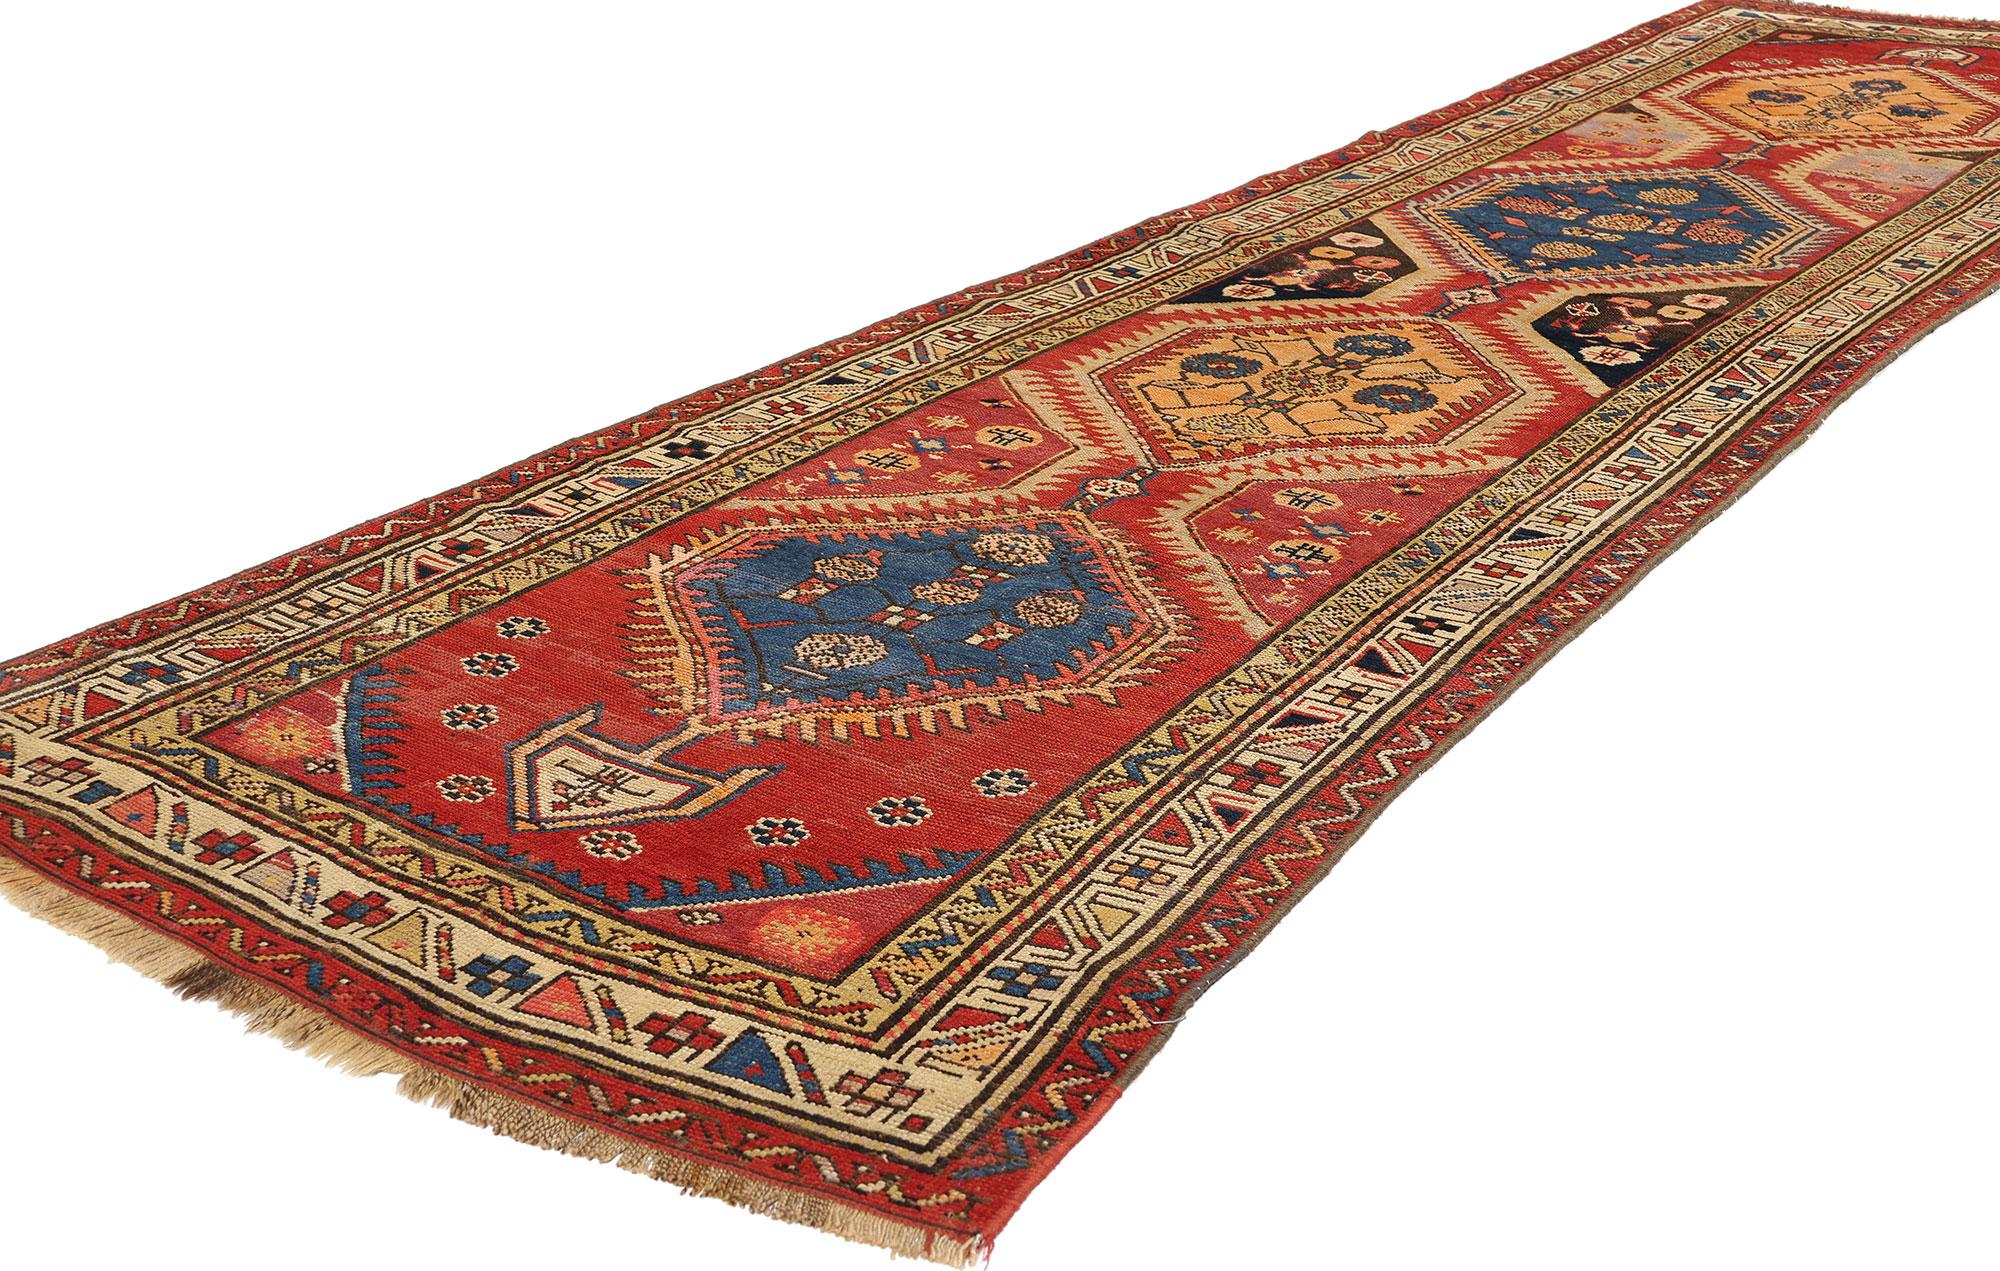 72401 Antique Caucasian Tribal Shirvan Rug Runner, 03’01 x 11’08. Caucasian Shirvan carpet runners are traditional rugs originating from the Shirvan region in the Caucasus Mountains, characterized by vibrant colors, geometric patterns, and intricate